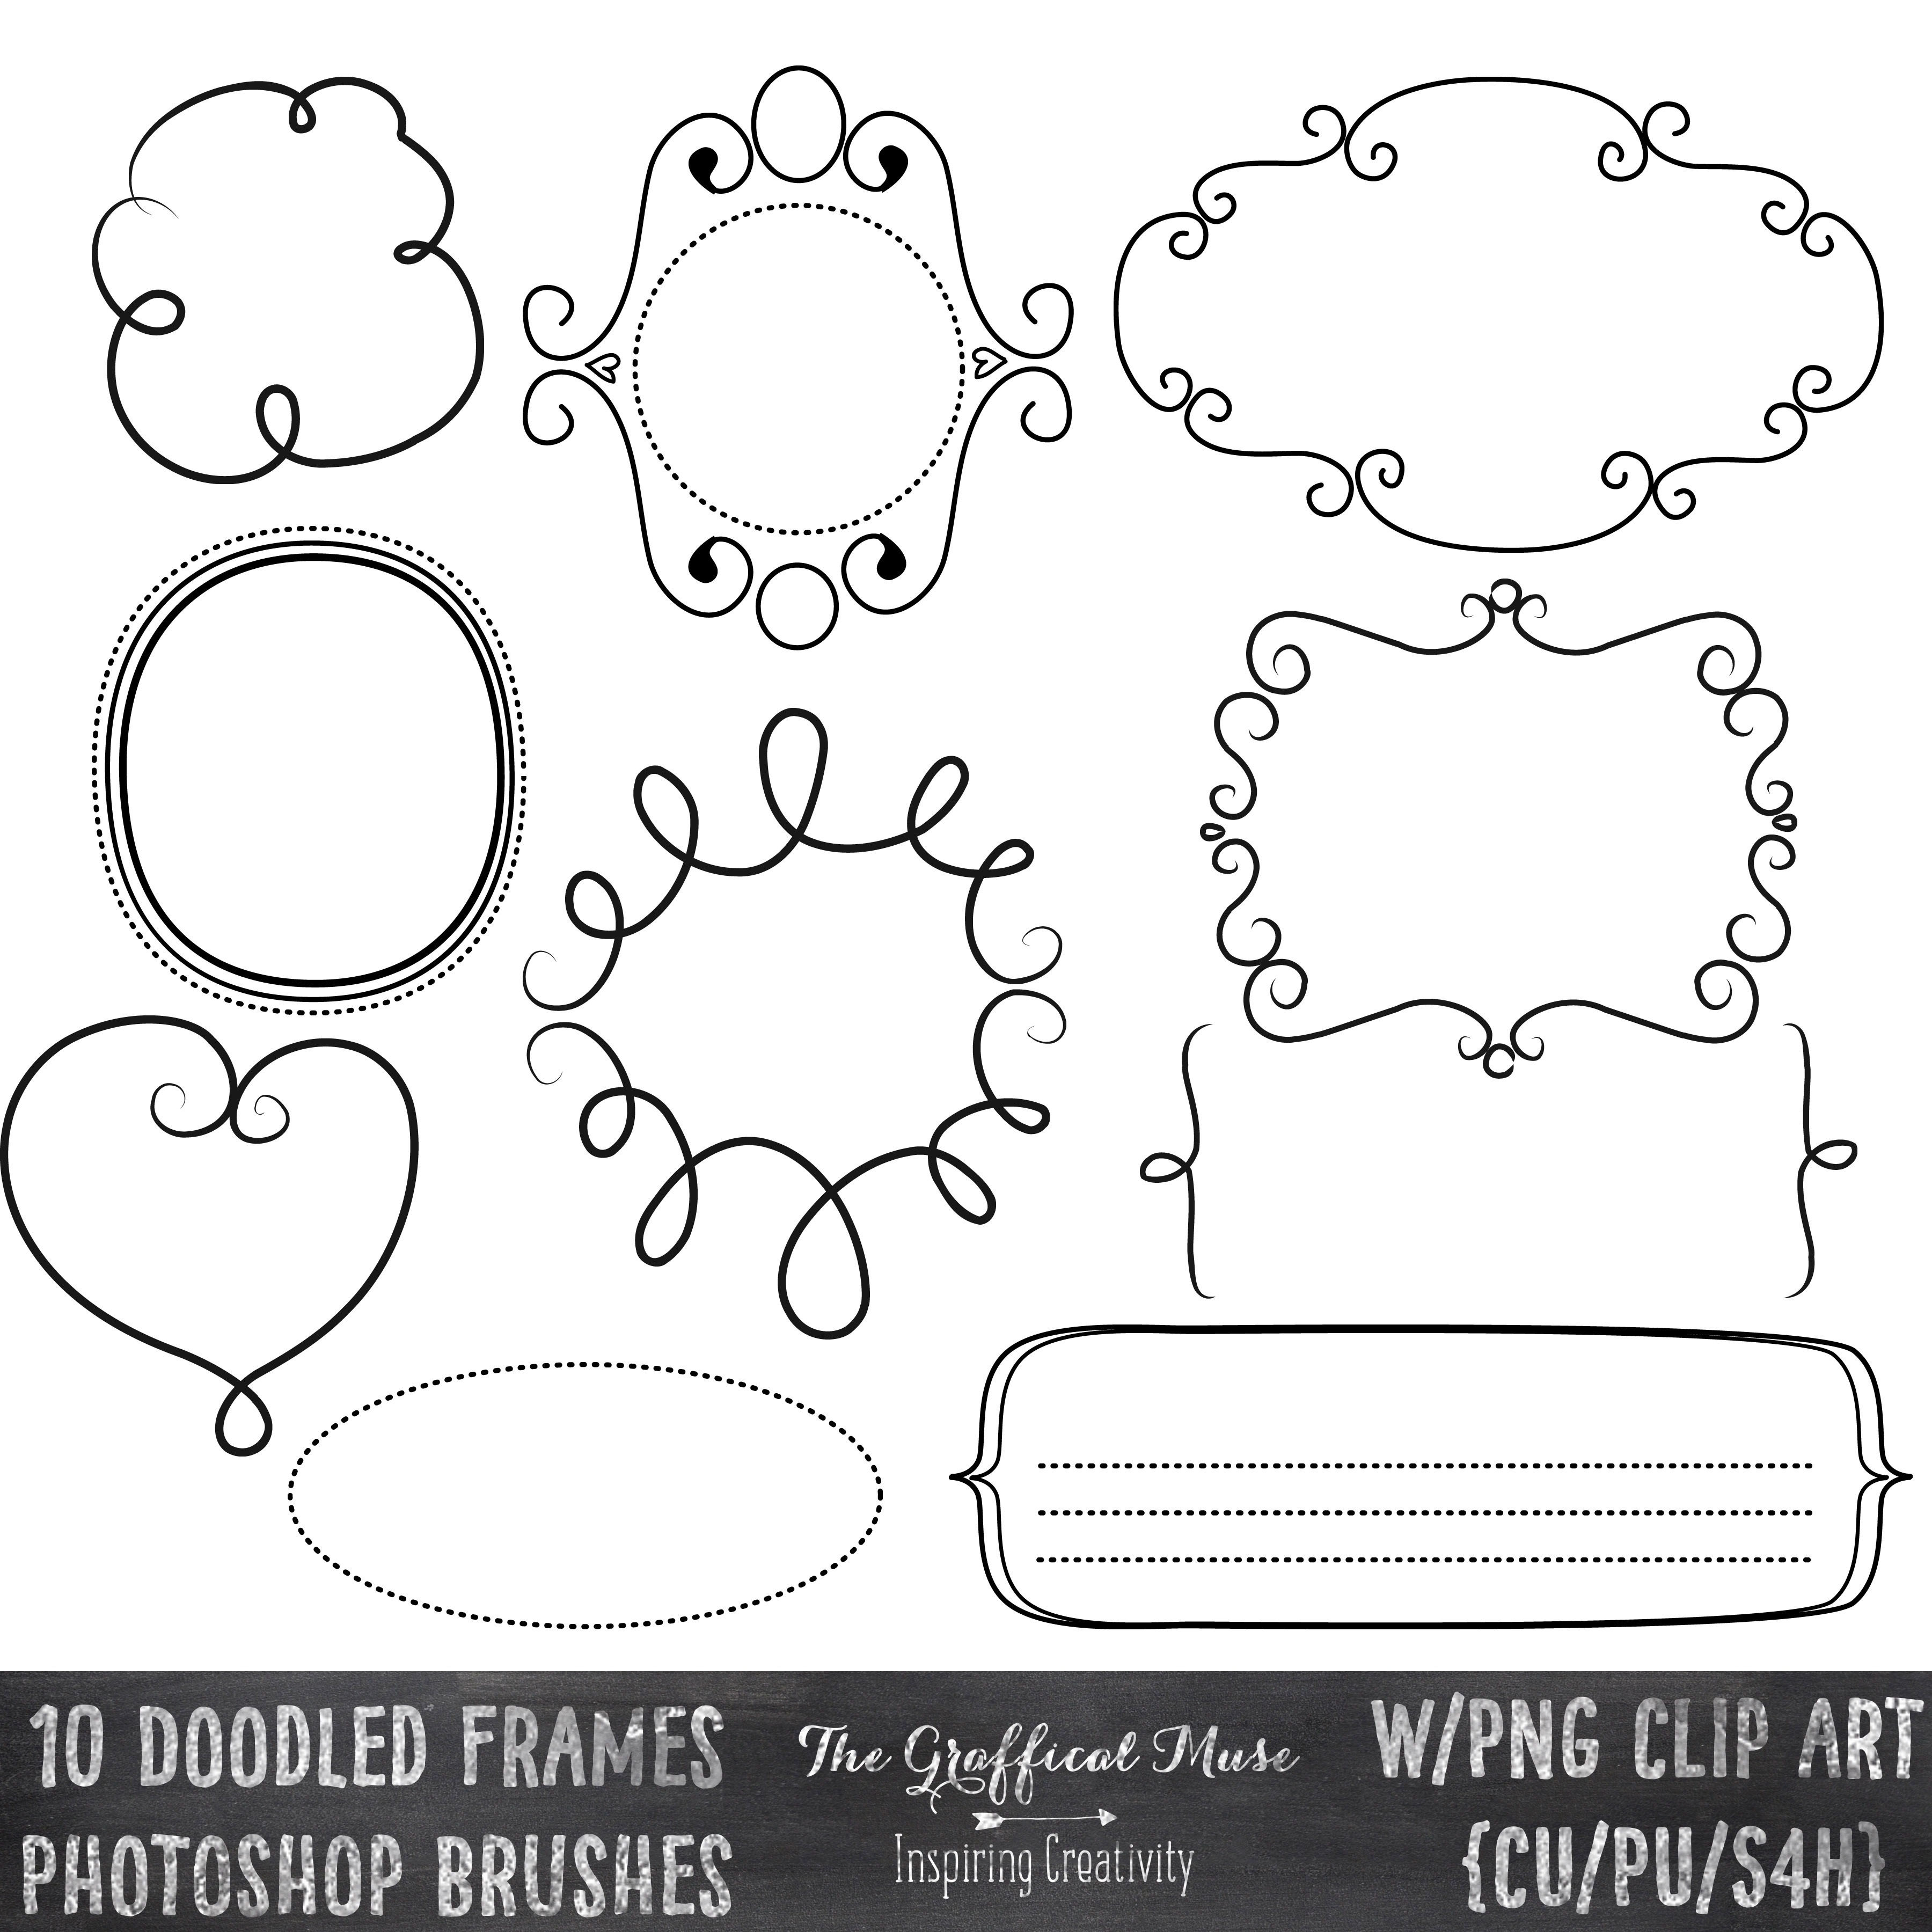 free clipart for photoshop brushes